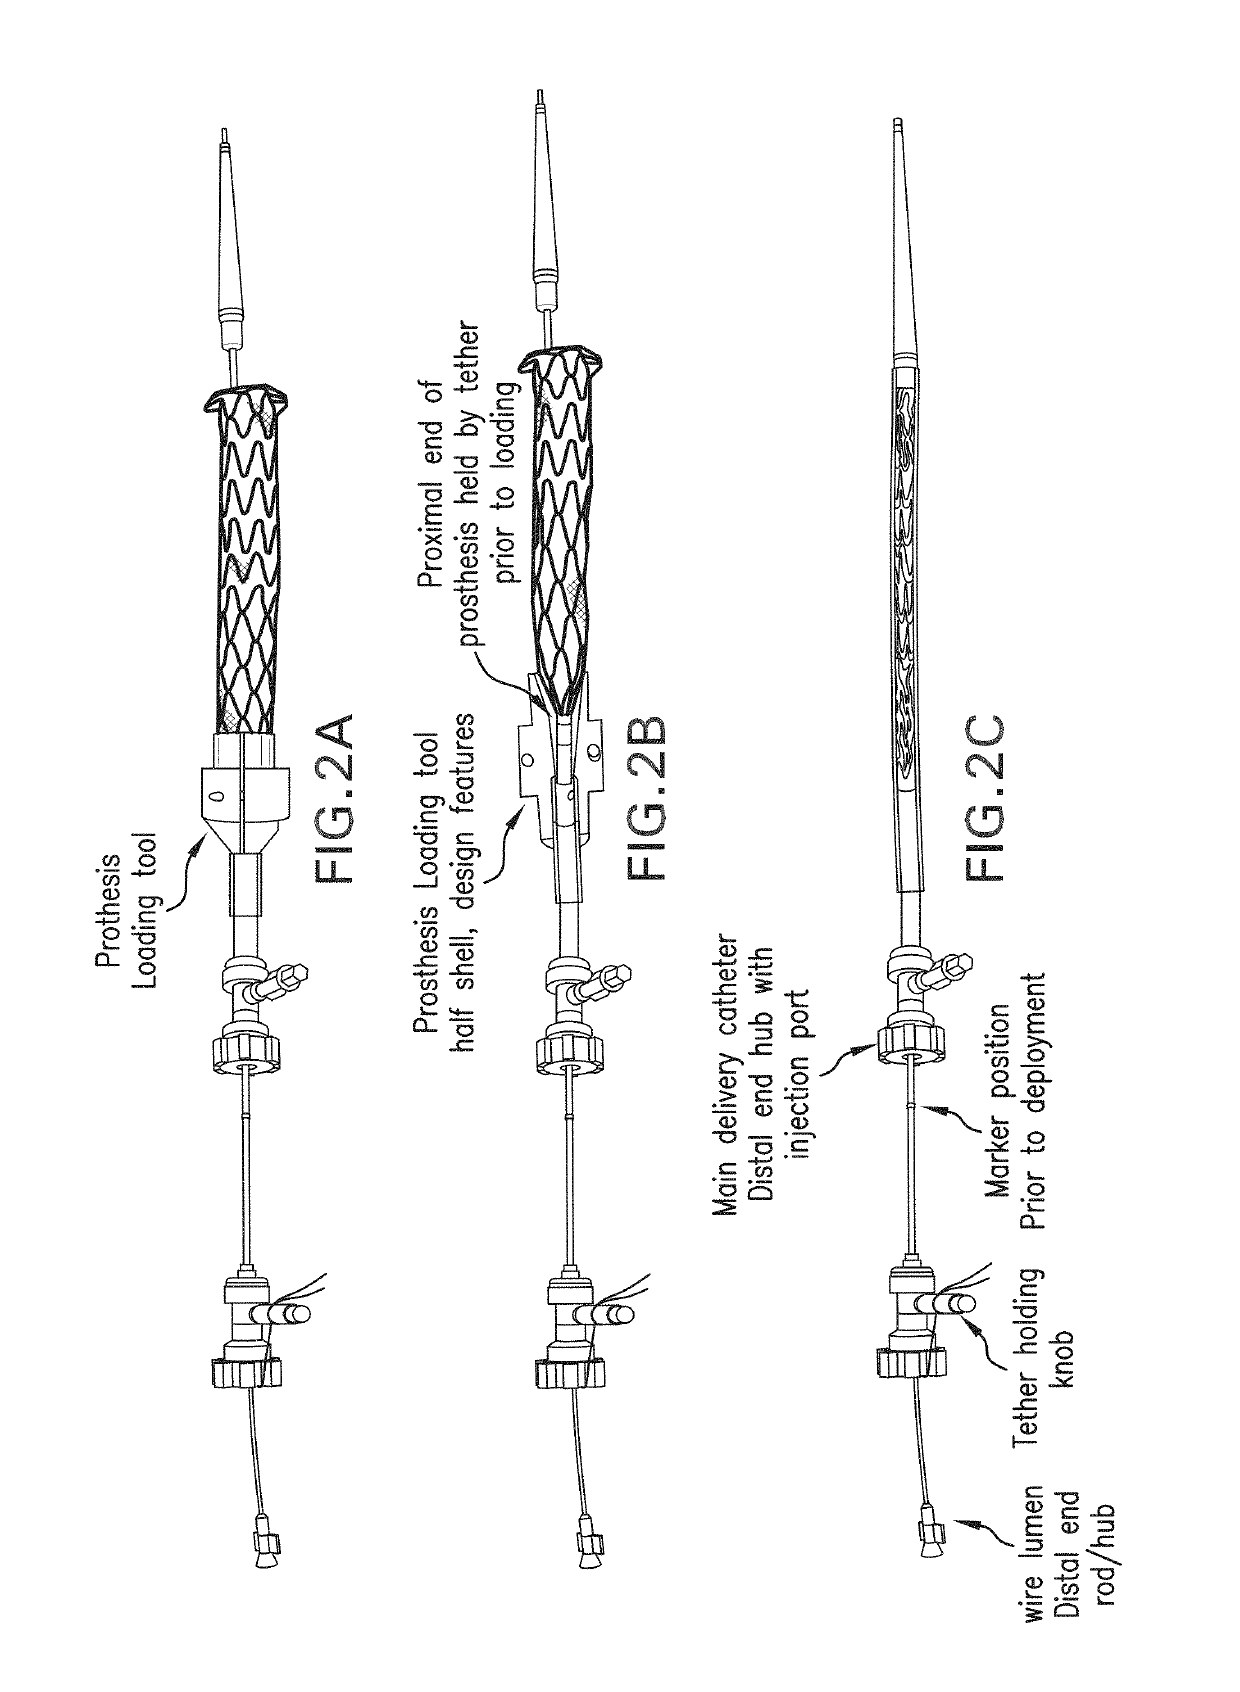 Devices and methods for effectuating percutaneous Glenn and Fontan procedures